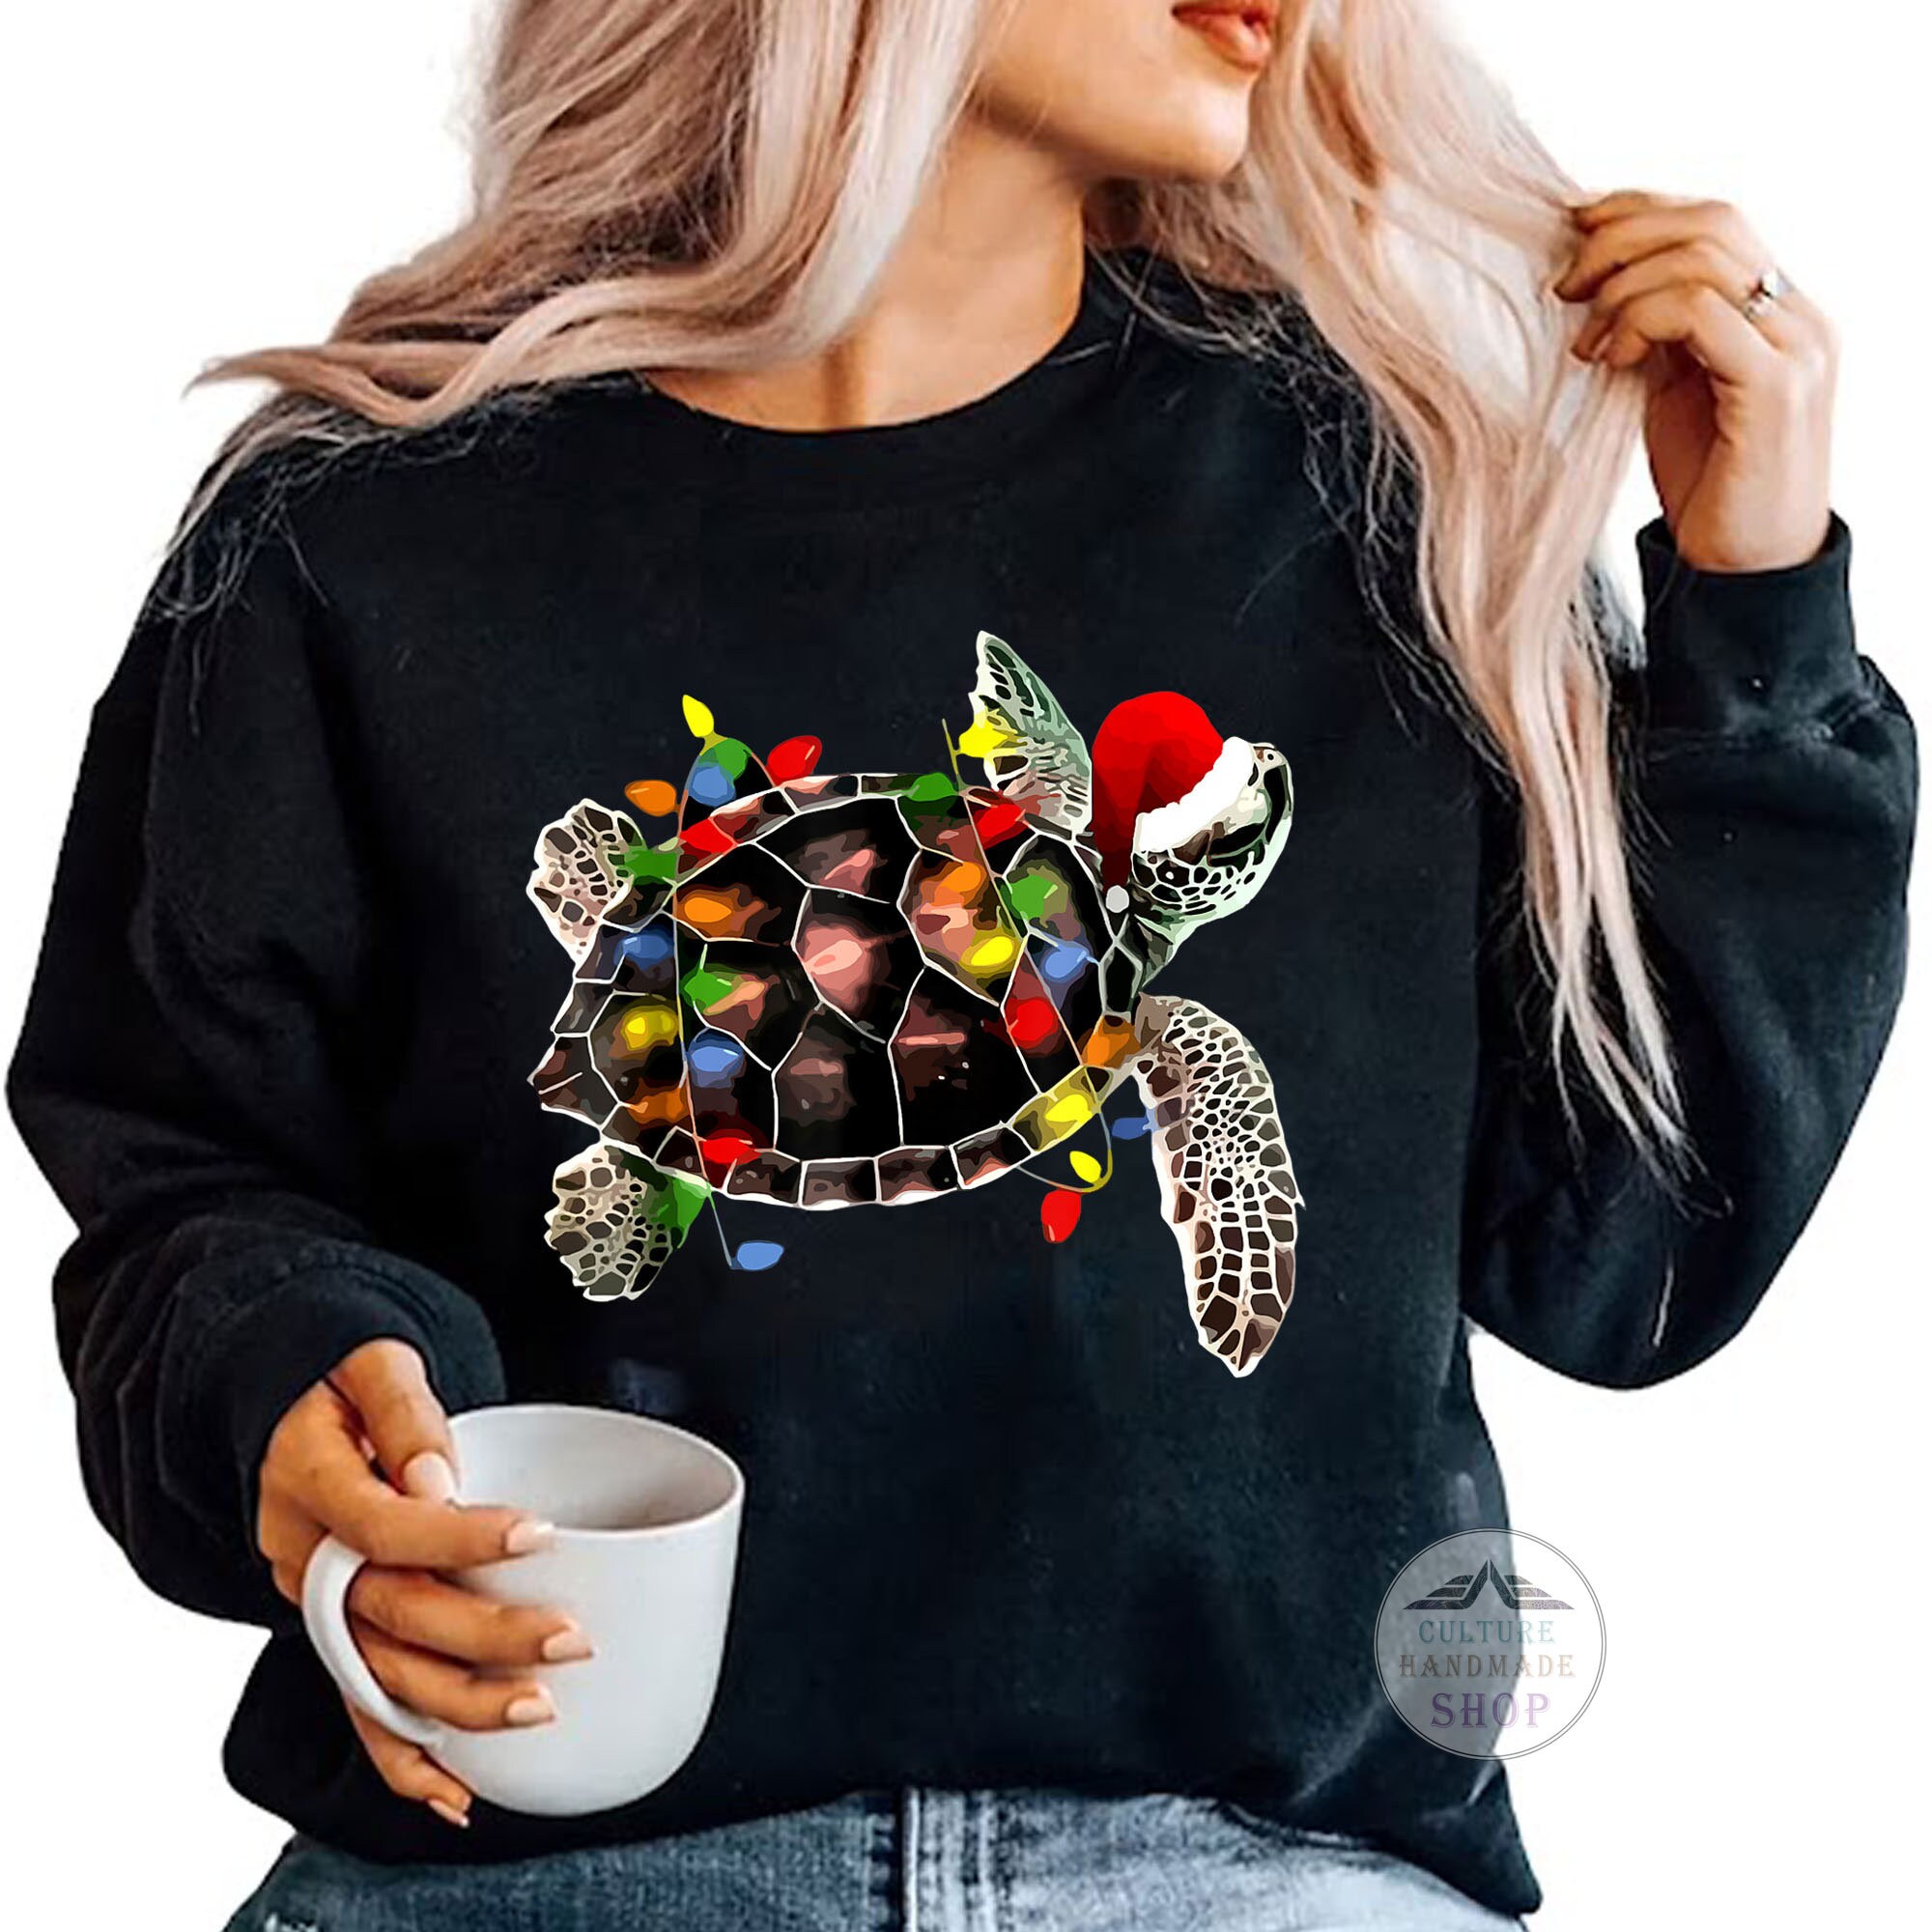 Christmas Turtle T-Shirt, Dear Santa Just Bring Turtles Santa Hat Star Gift for Turtle lovers, Turtle Owners